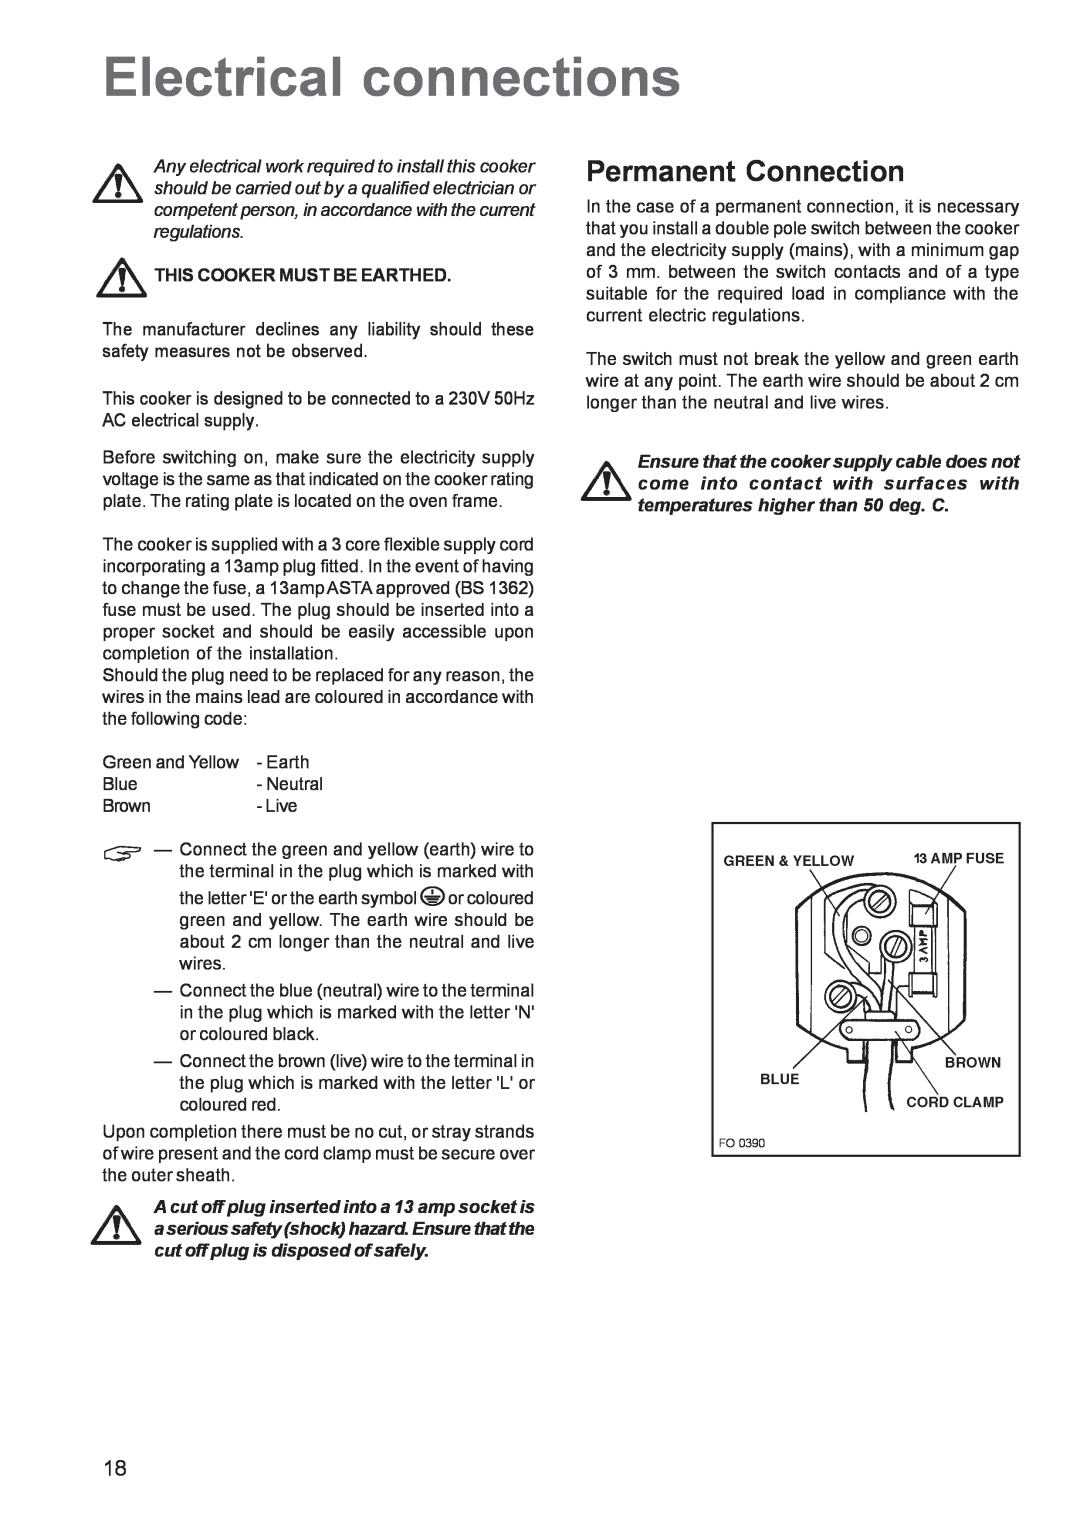 Zanussi ZCM 640 ZCM 641 manual Electrical connections, Permanent Connection, This Cooker Must Be Earthed 